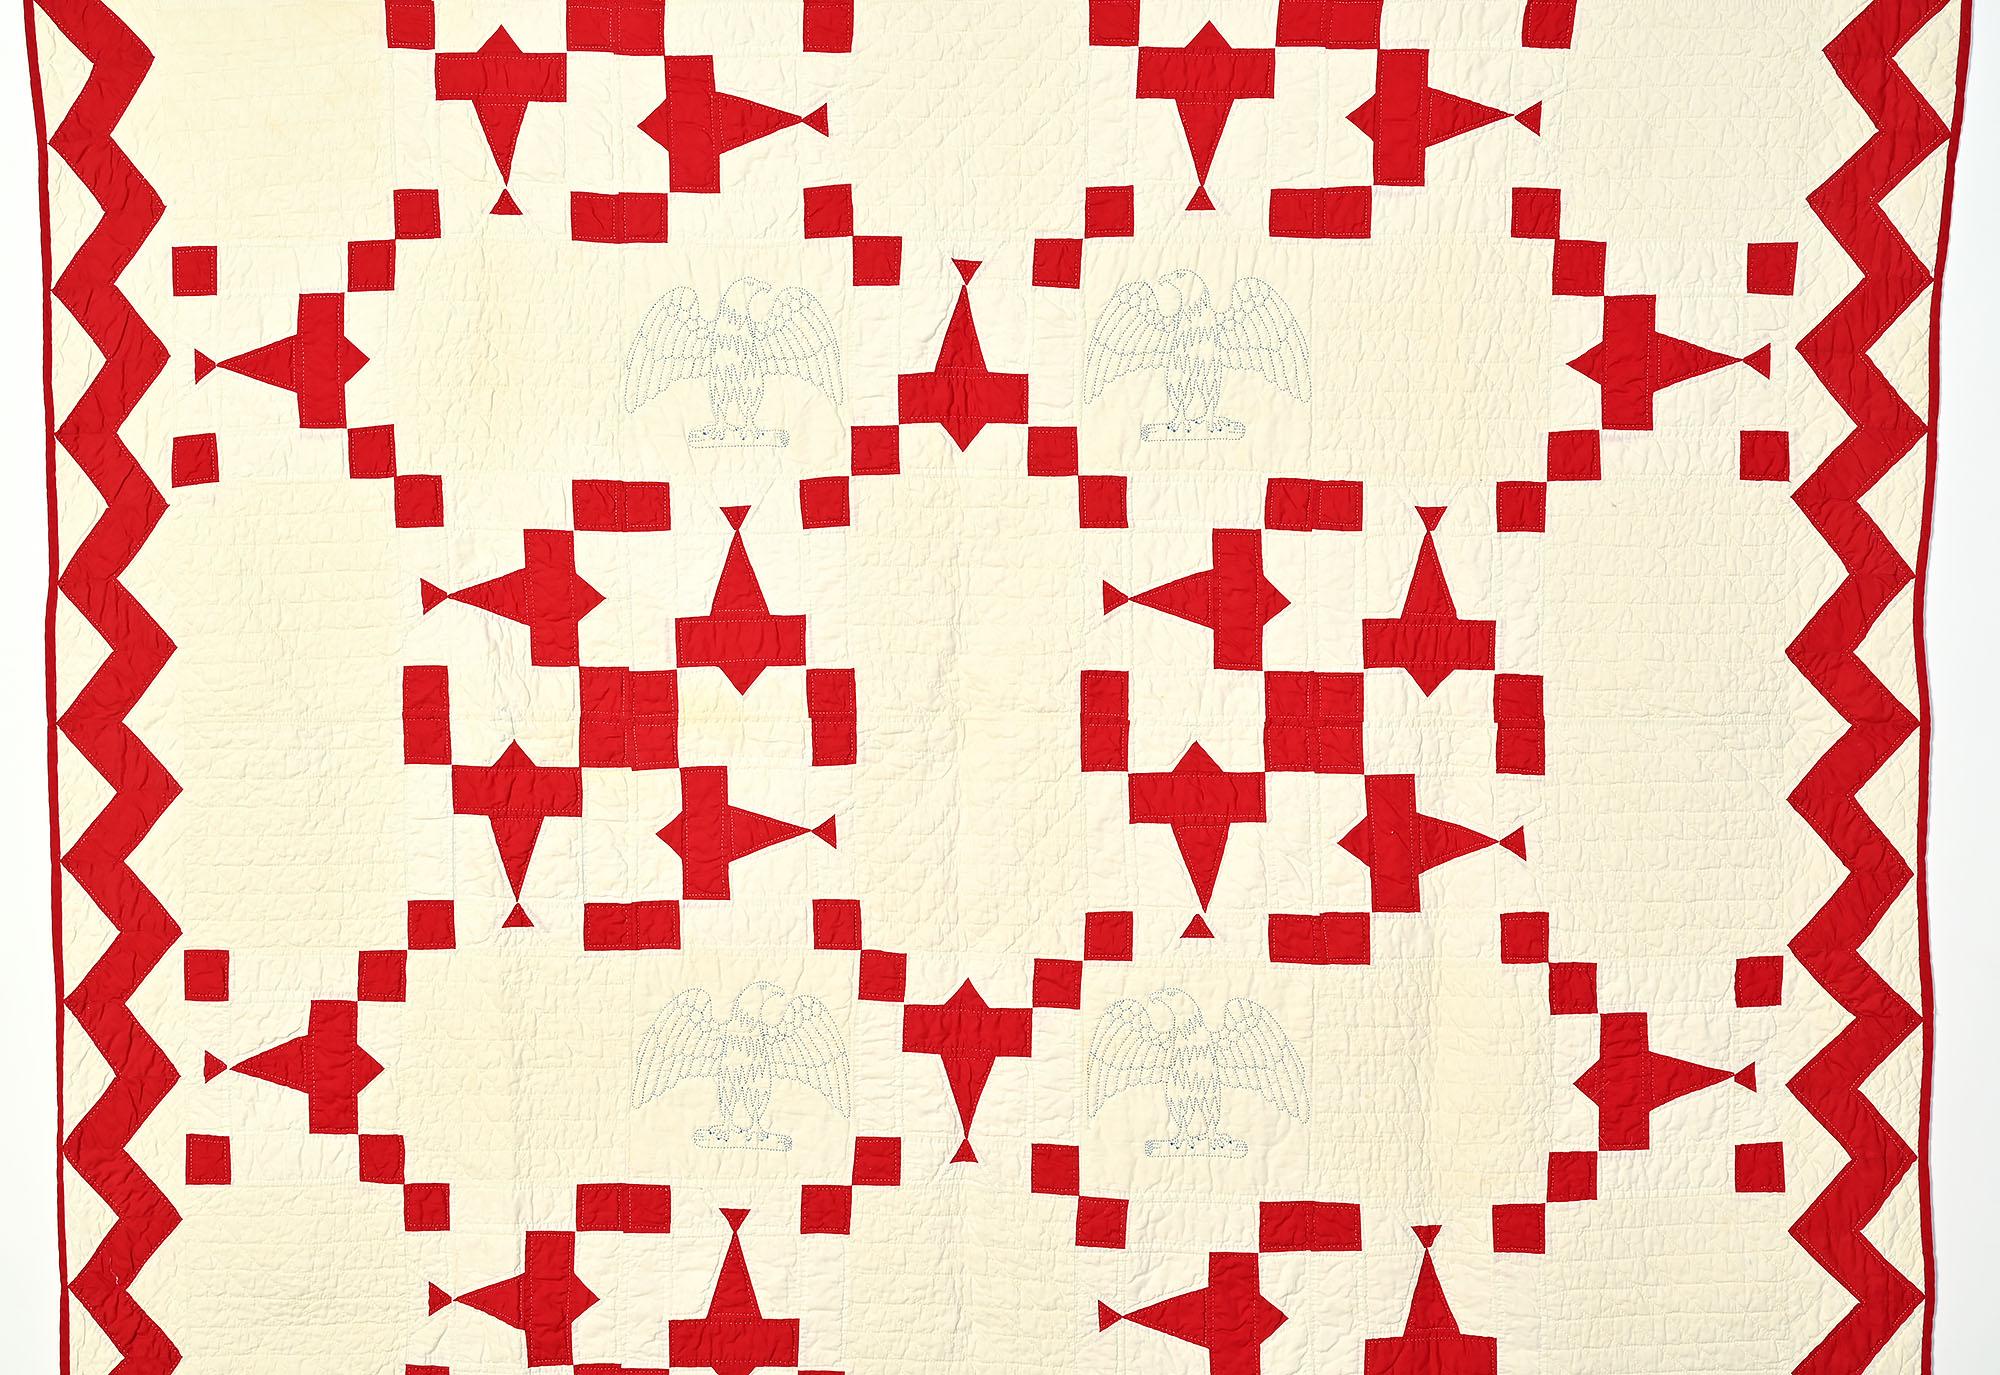 In May, 1927, Charles Lindbergh was the first to fly solo across the Atlantic  He went from New York to Paris in 33 hours.  Quiltmakers were inspired to commemorate this historic event.

The example depicted here is unlike others I have seen in that